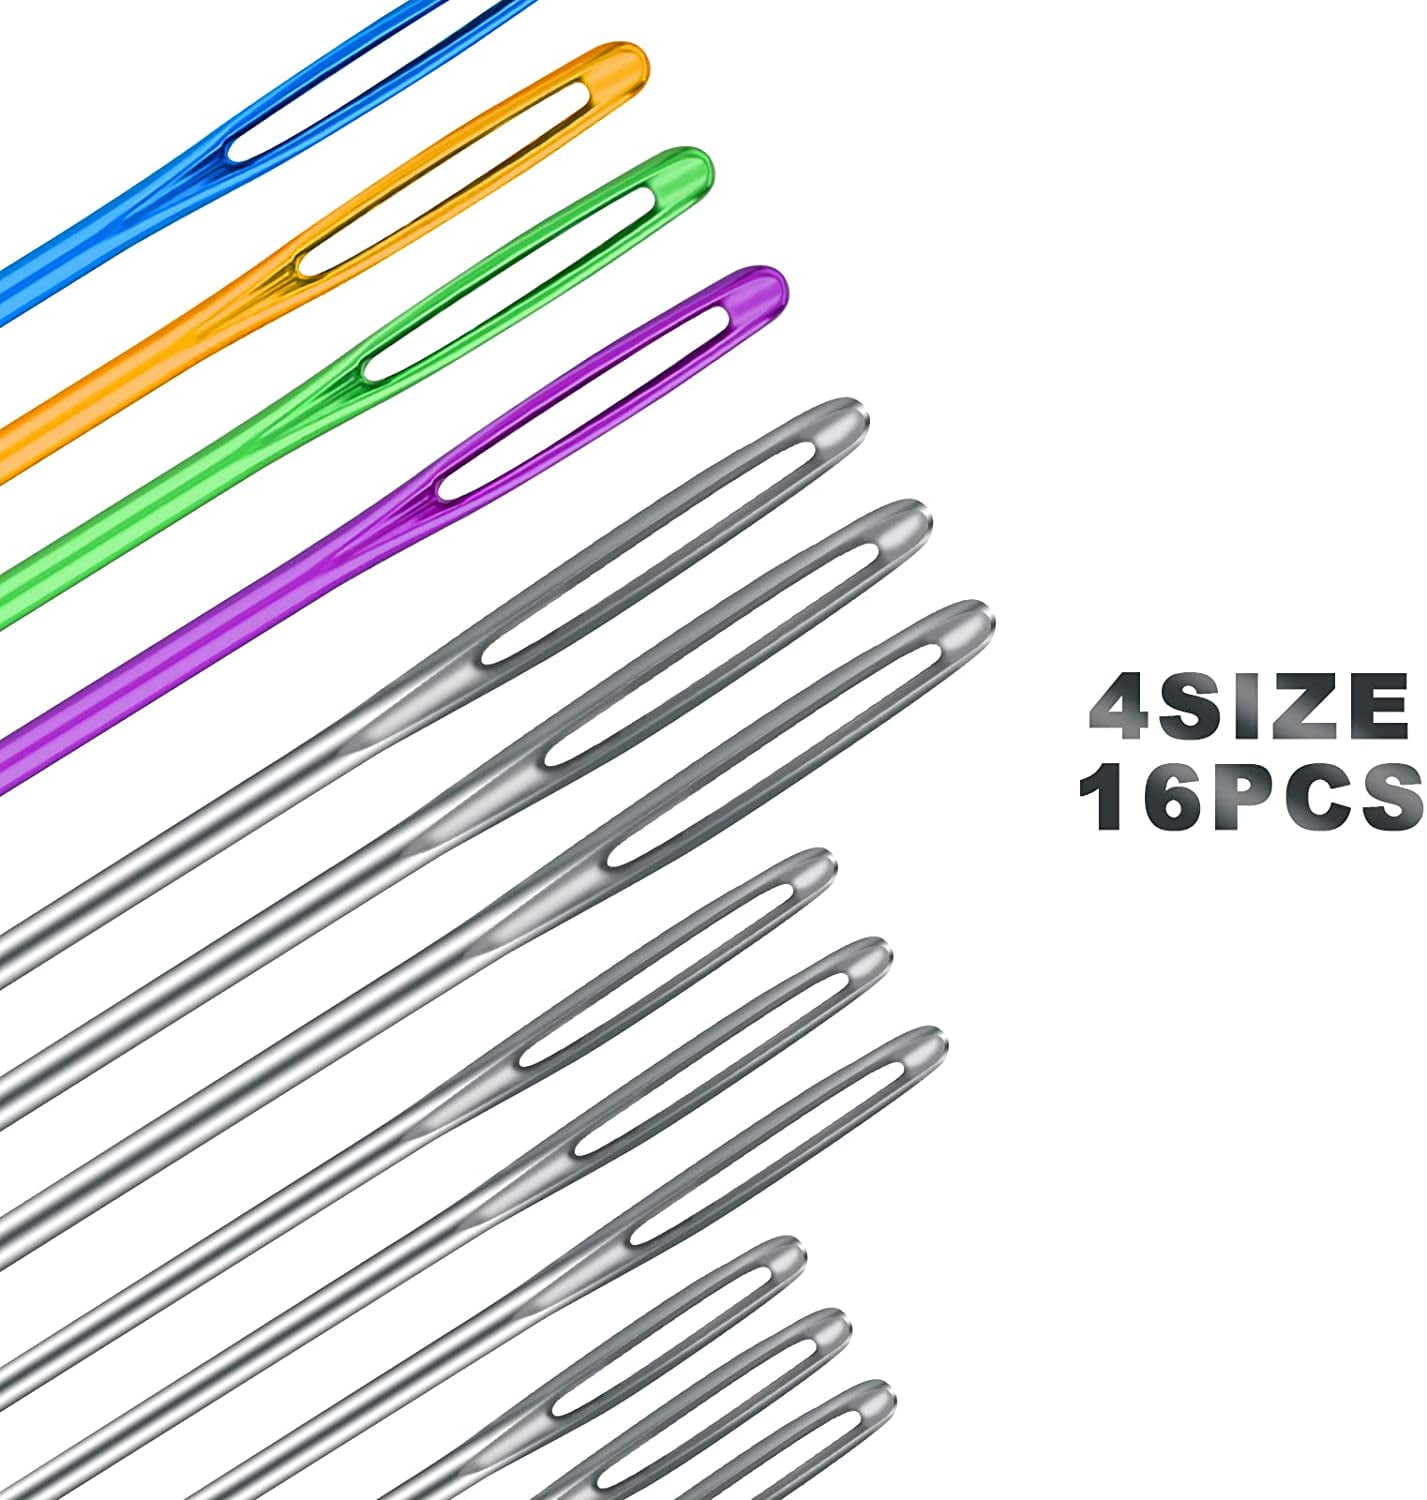  16pcs Large-Eye Blunt Needle, Plastic Bent Tapestry Needle,  Stainless Steel Yarn Knitting Needles Sewing Needles Wool Needle Hand  Knitting Needle Sewing Knitting Needle for Crochet Projects (2 Styles) :  Arts, Crafts